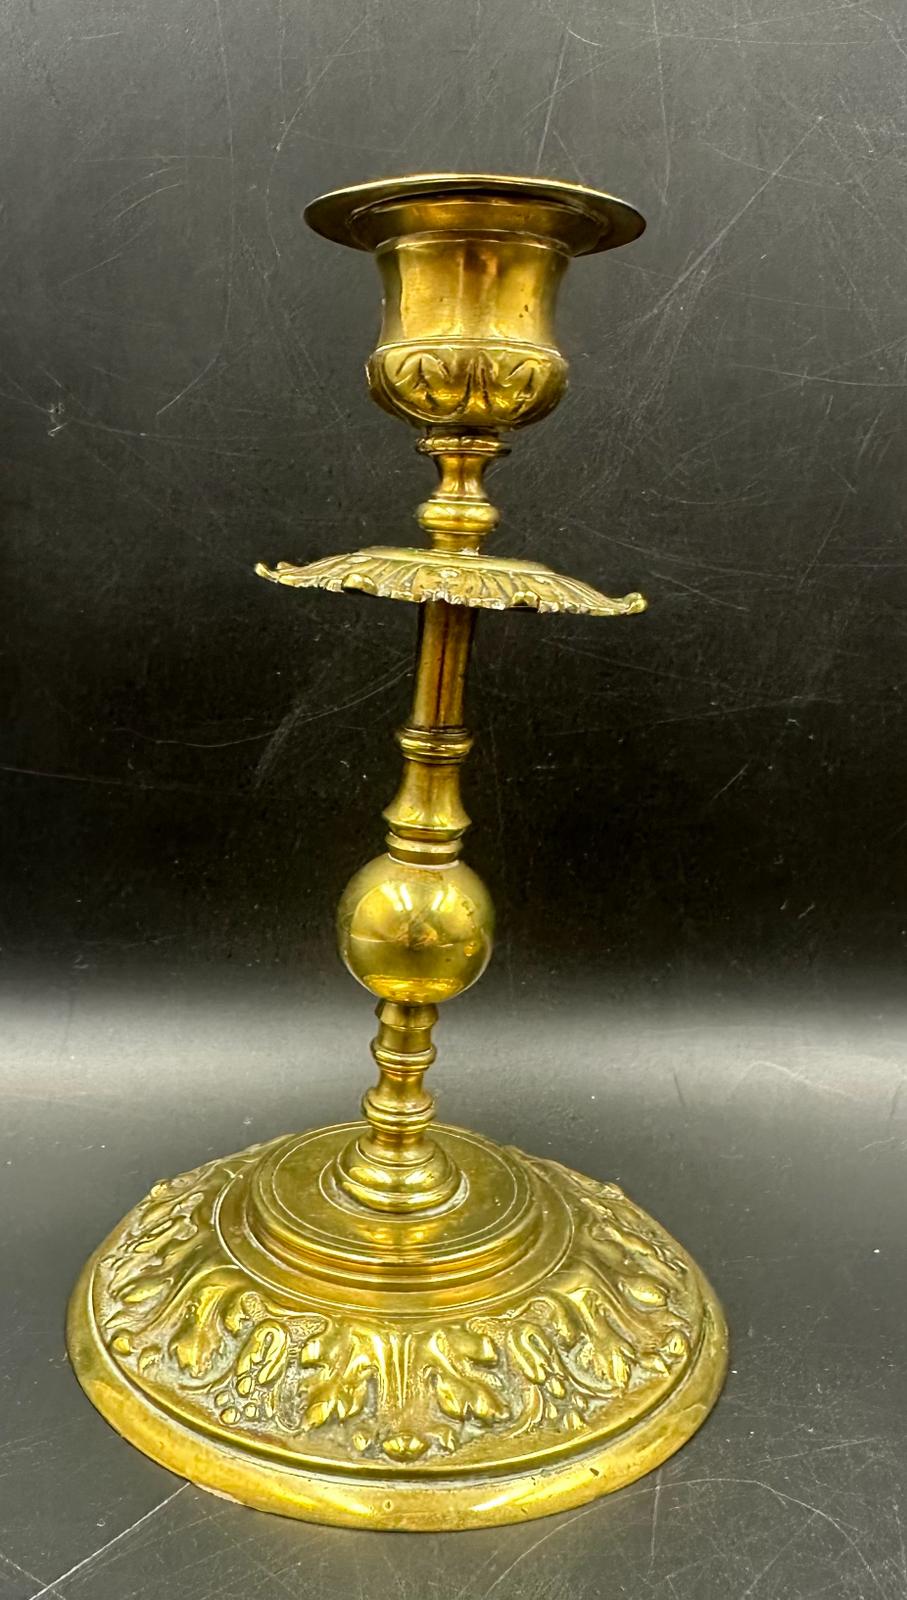 Two pairs of ornate brass candlesticks - Image 2 of 4